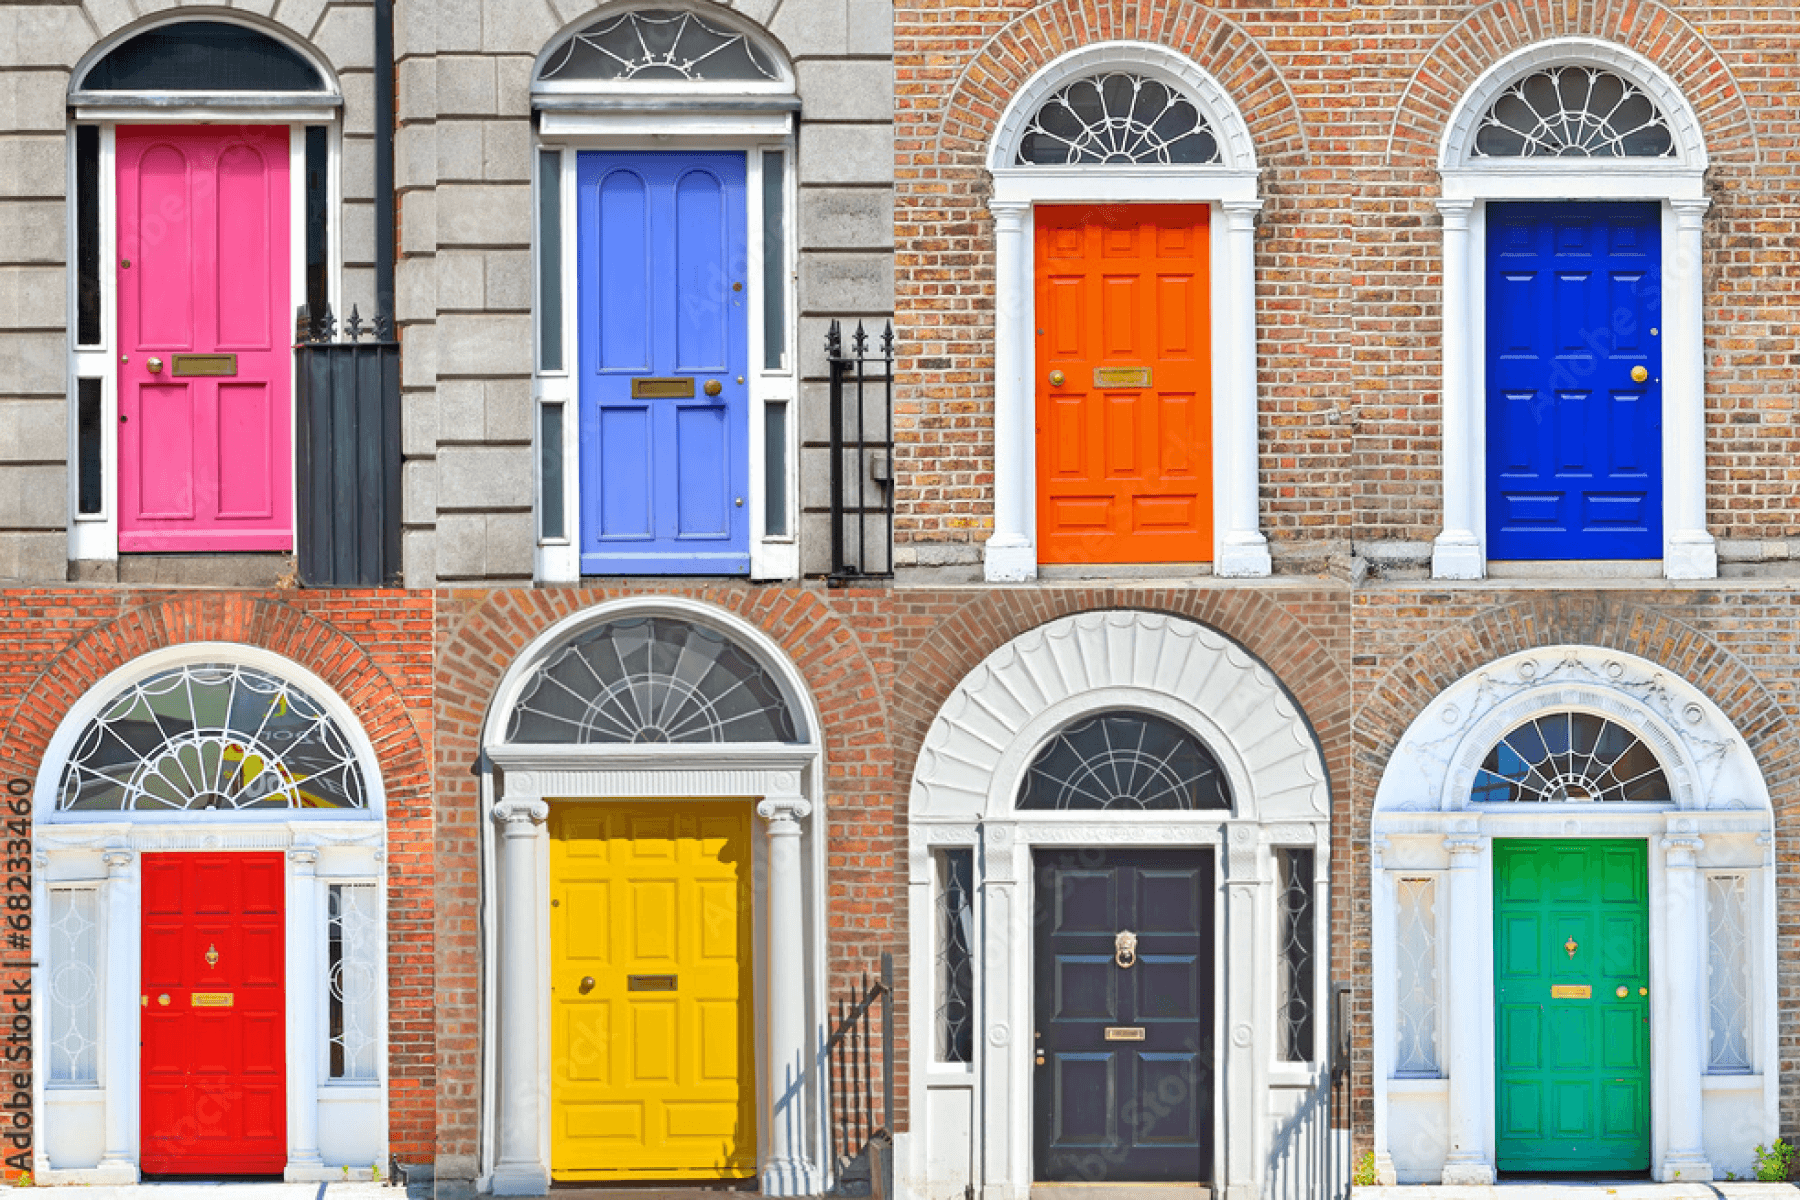 Eight colorful front doors on brick facades.